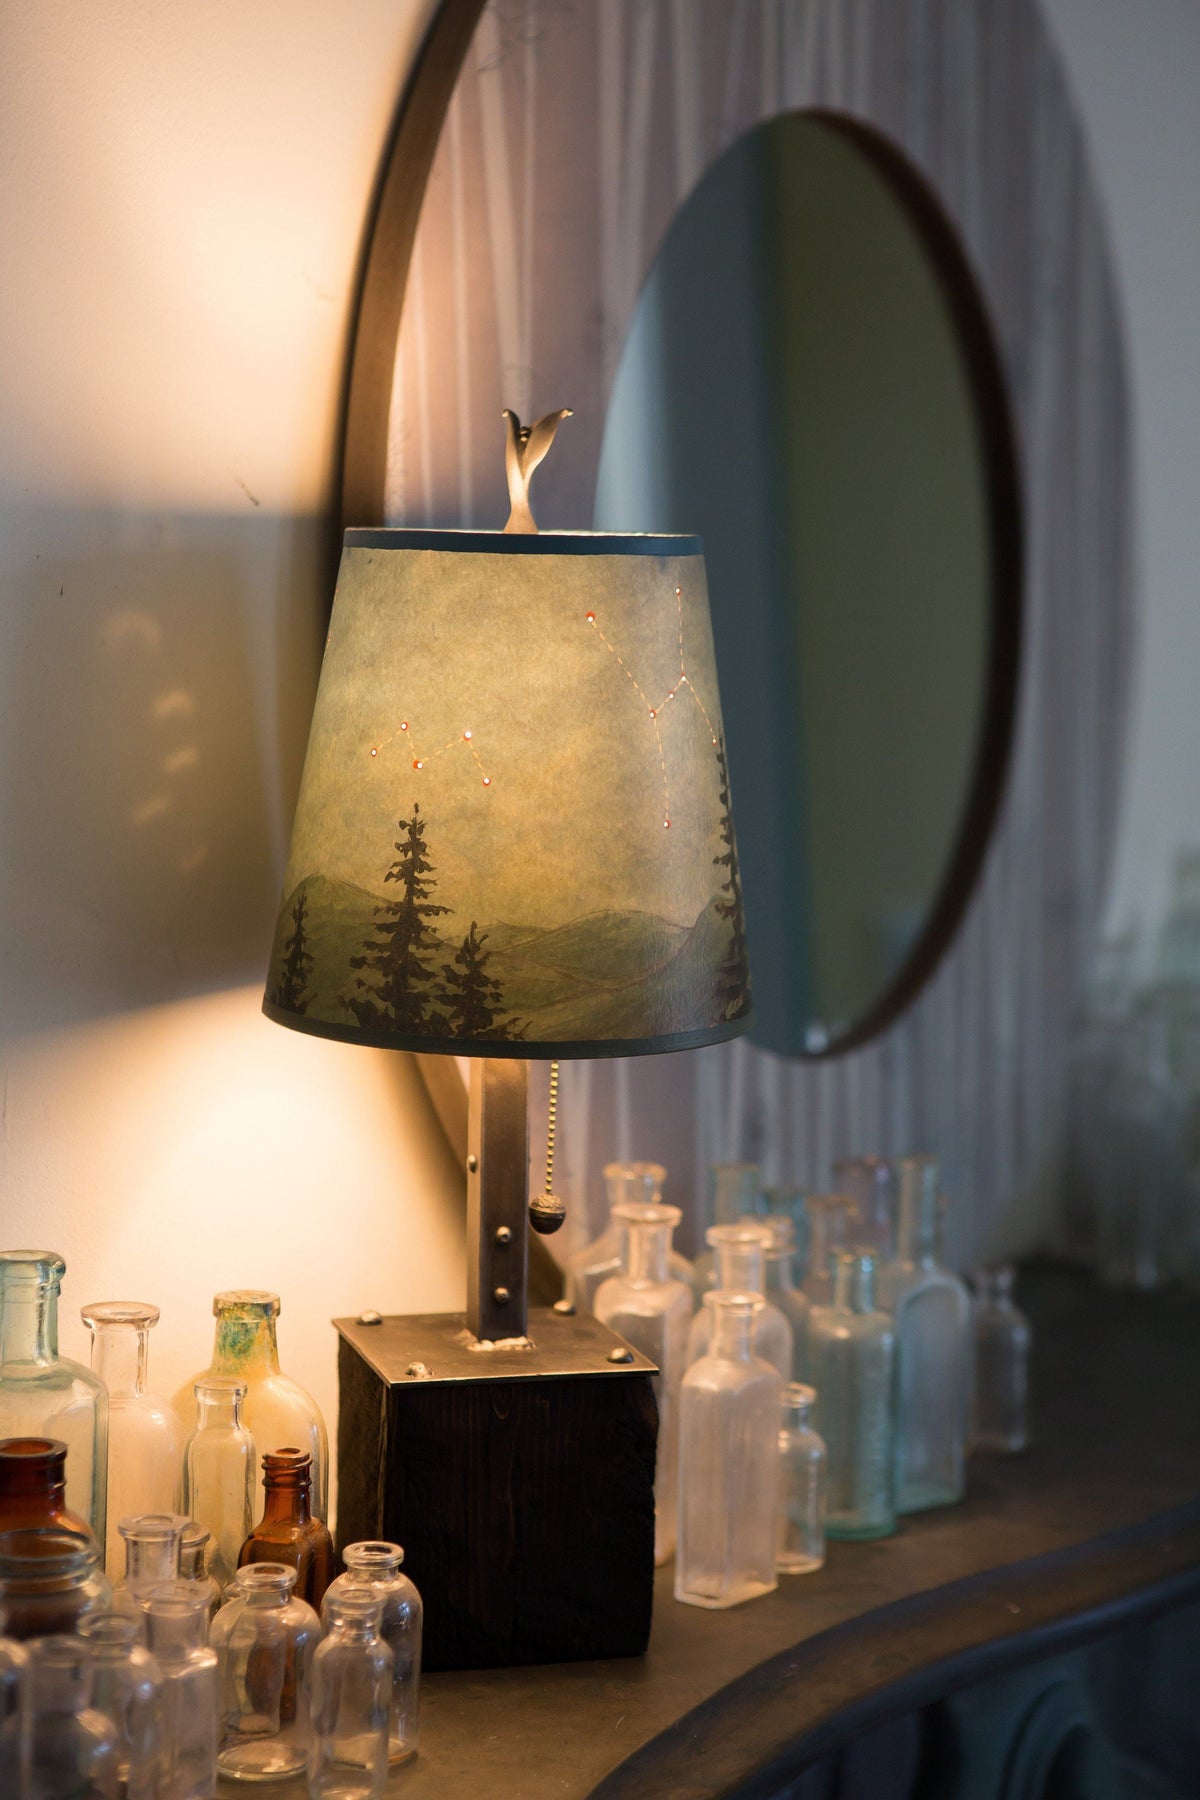 Steel Table Lamp on Reclaimed Wood with Small Drum Shade in Midnight Sky 